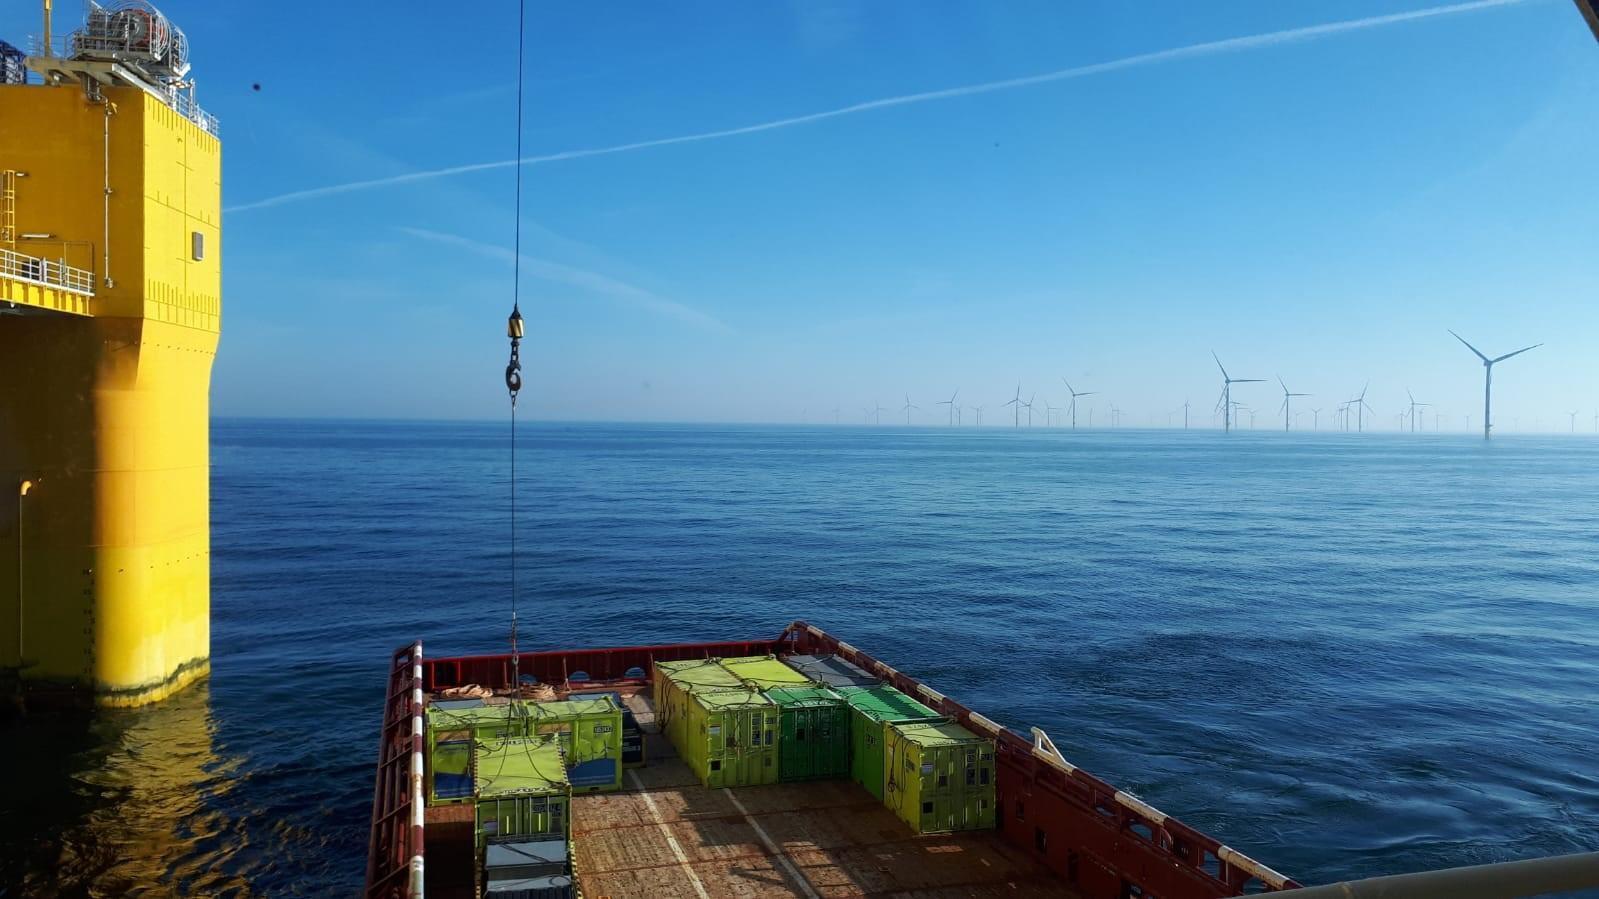 Cargostore and Rhenus Come to Taiwan for Offshore Wind